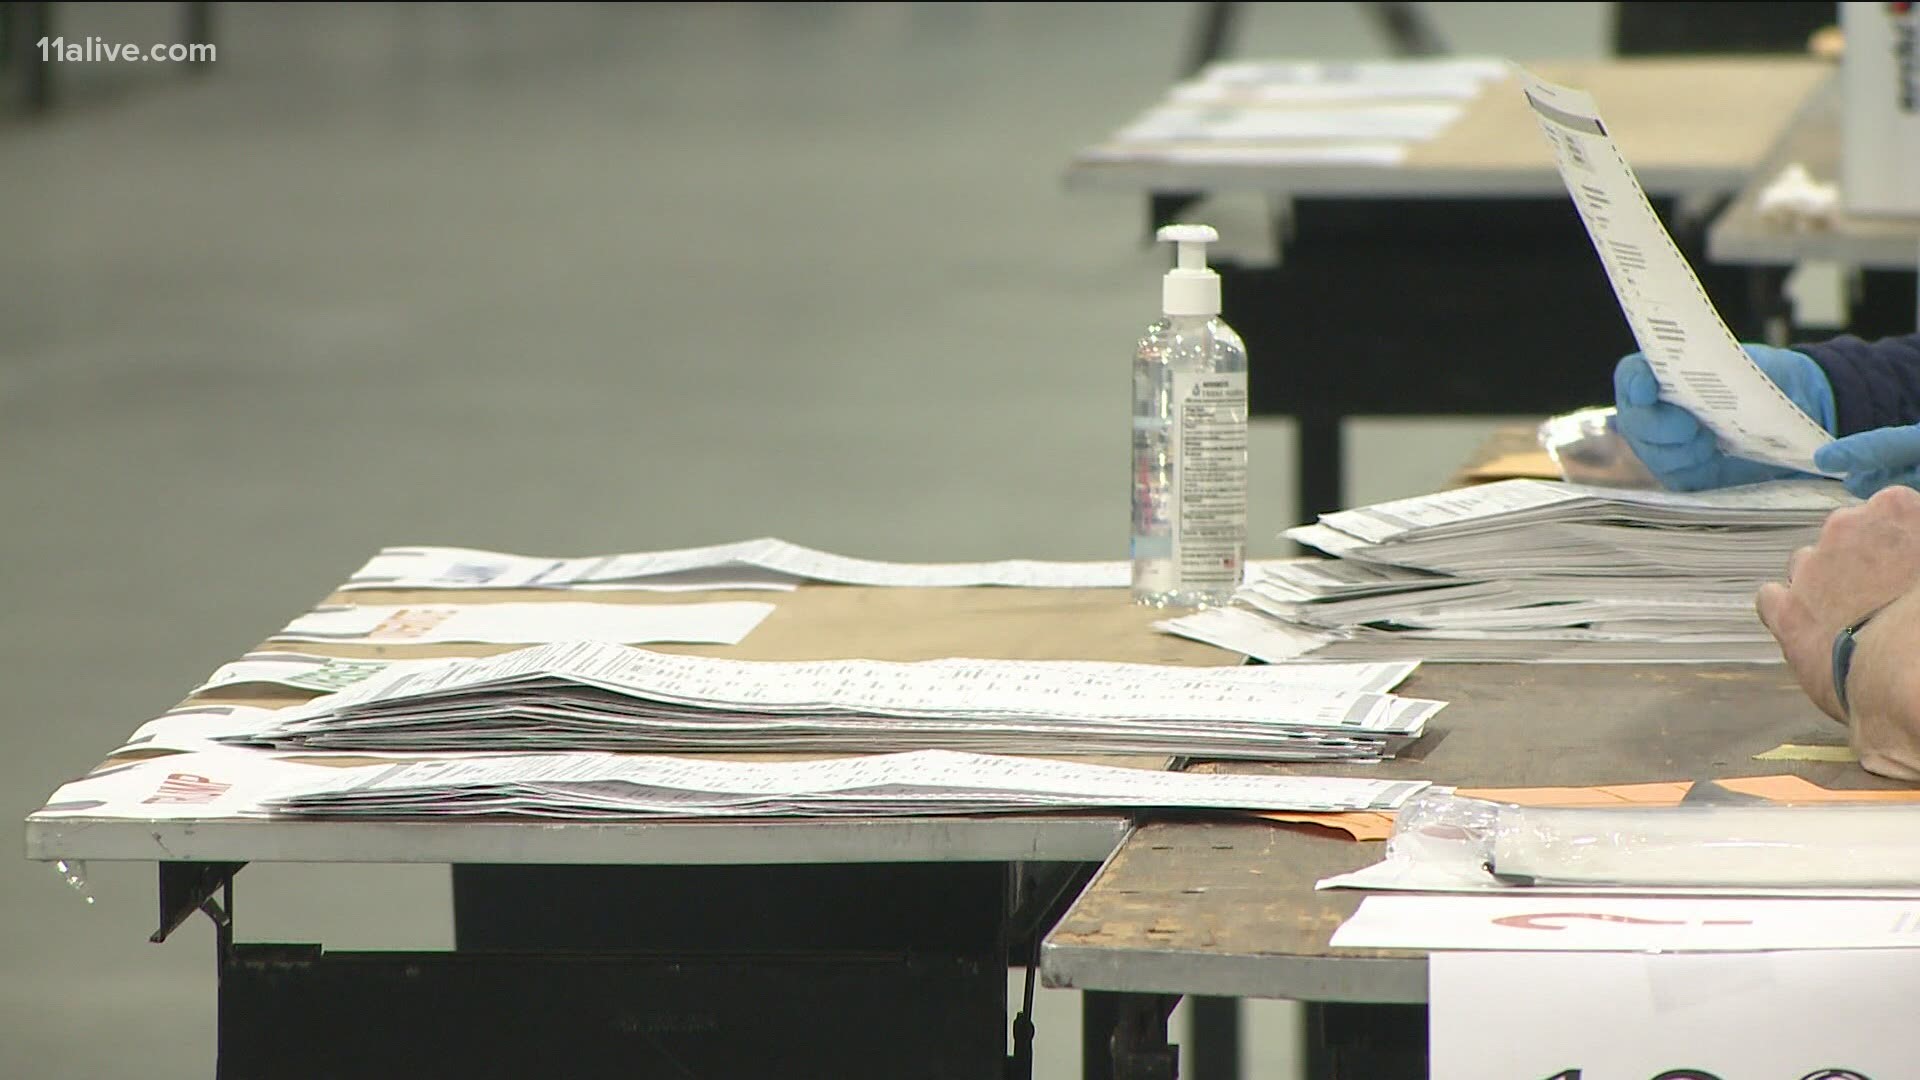 This is the third time roughly 5 million ballots will be tallied since election day.